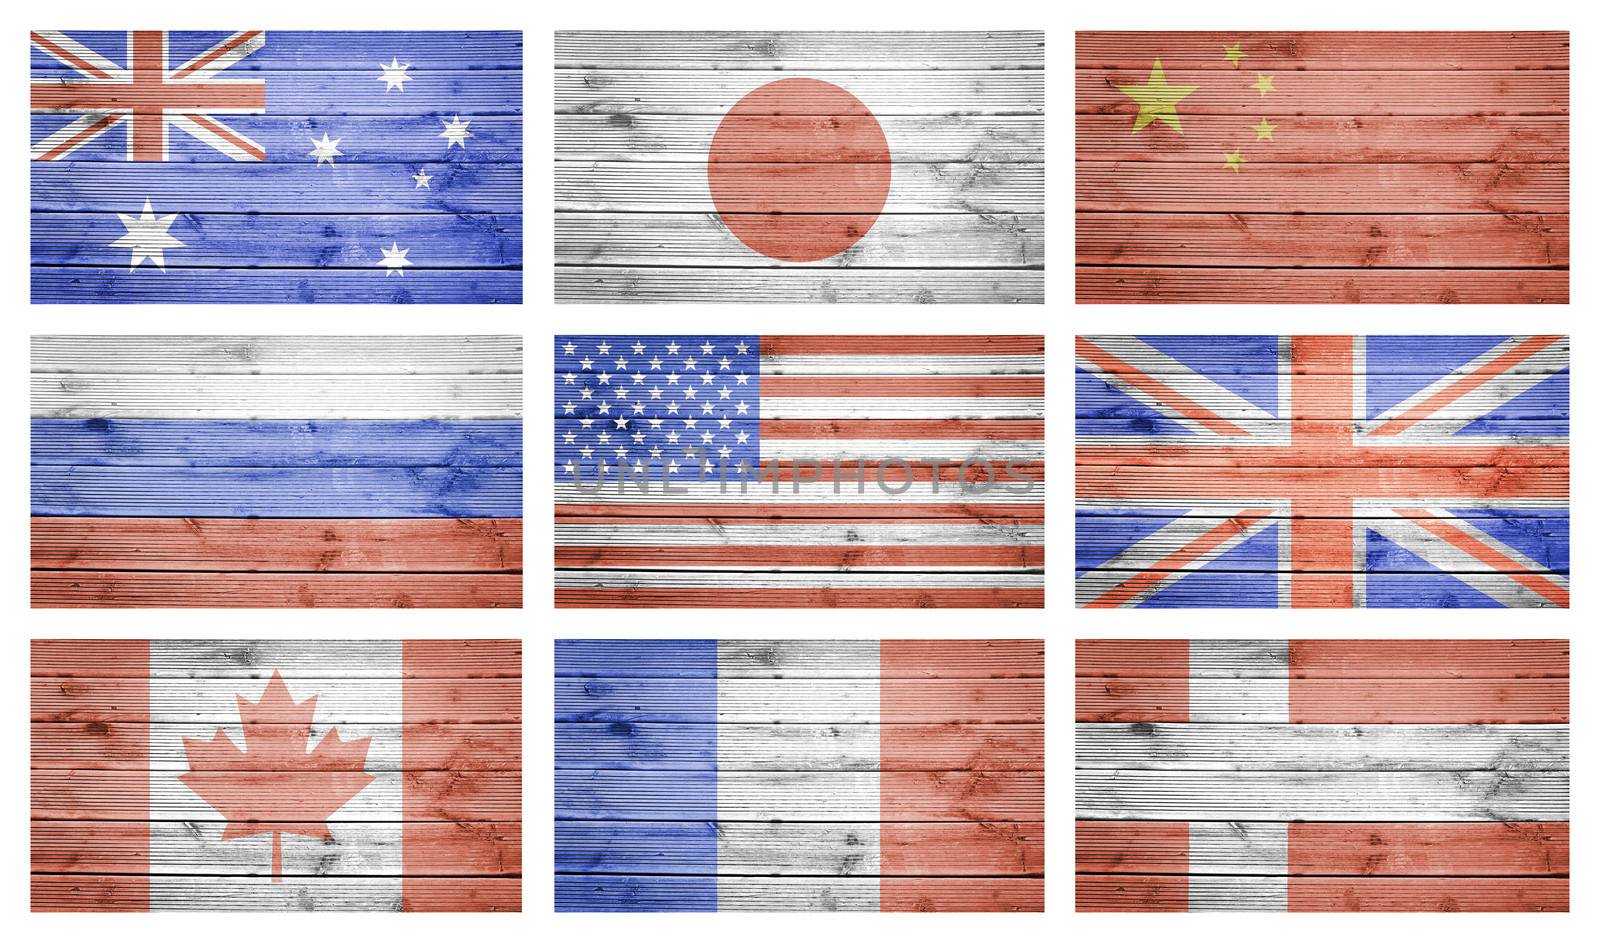 World flags collage over natural wood planks texture